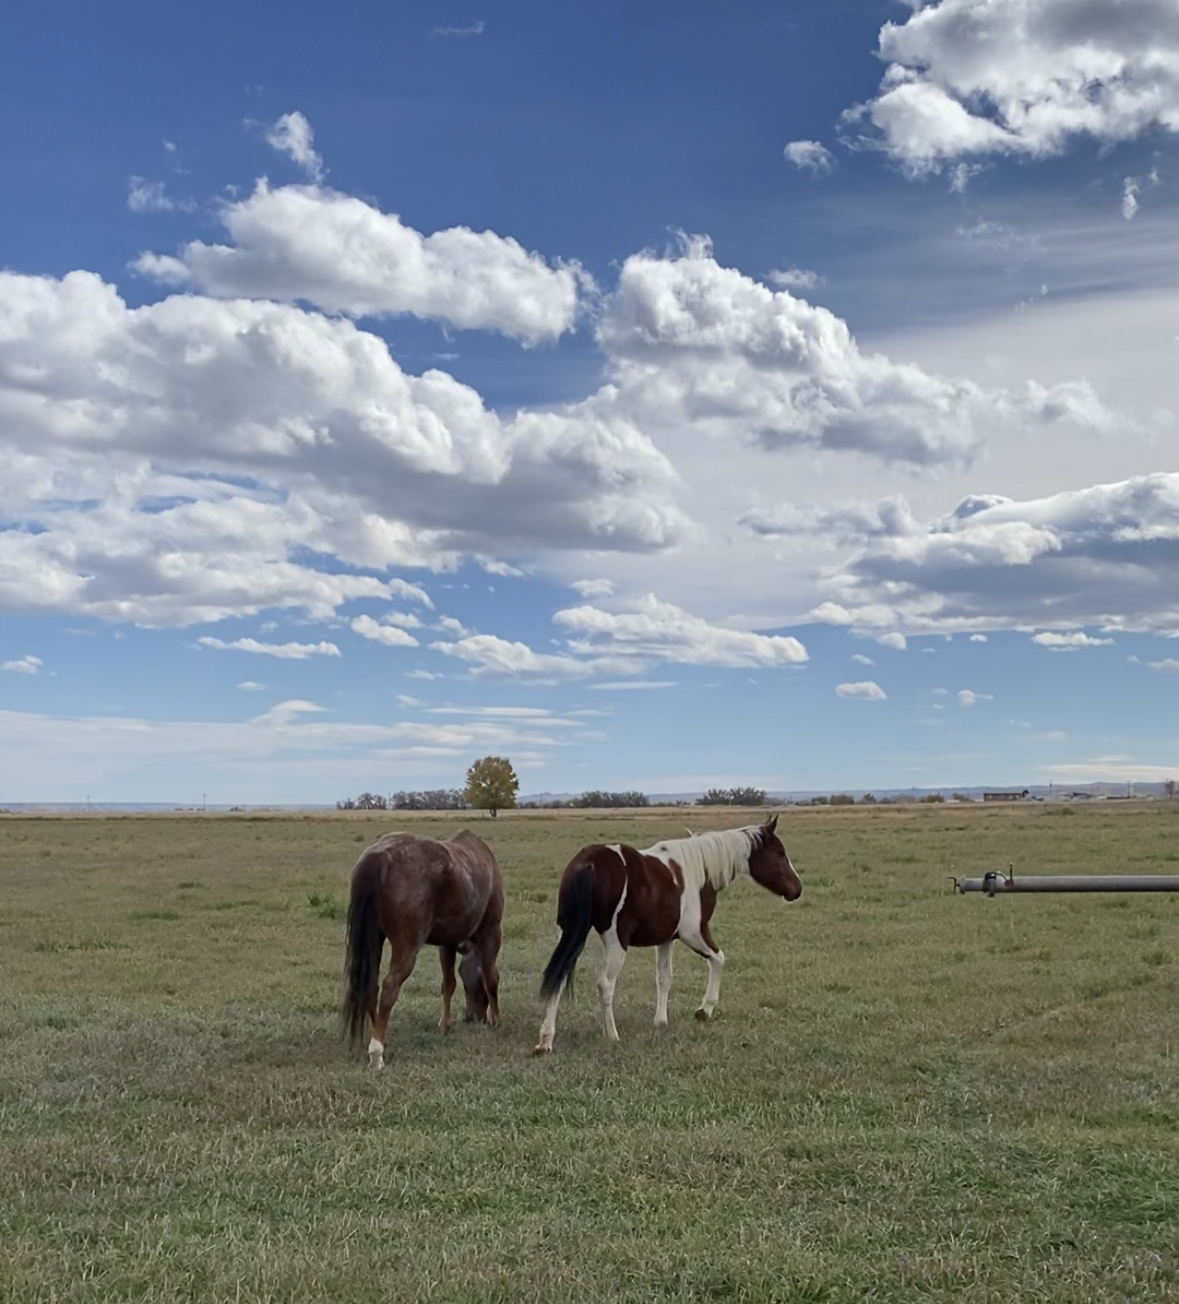 Horses in Green Pasture with Blue Skies Lazy L&B Ranch Dubois Wyoming Guest Dude Ranch